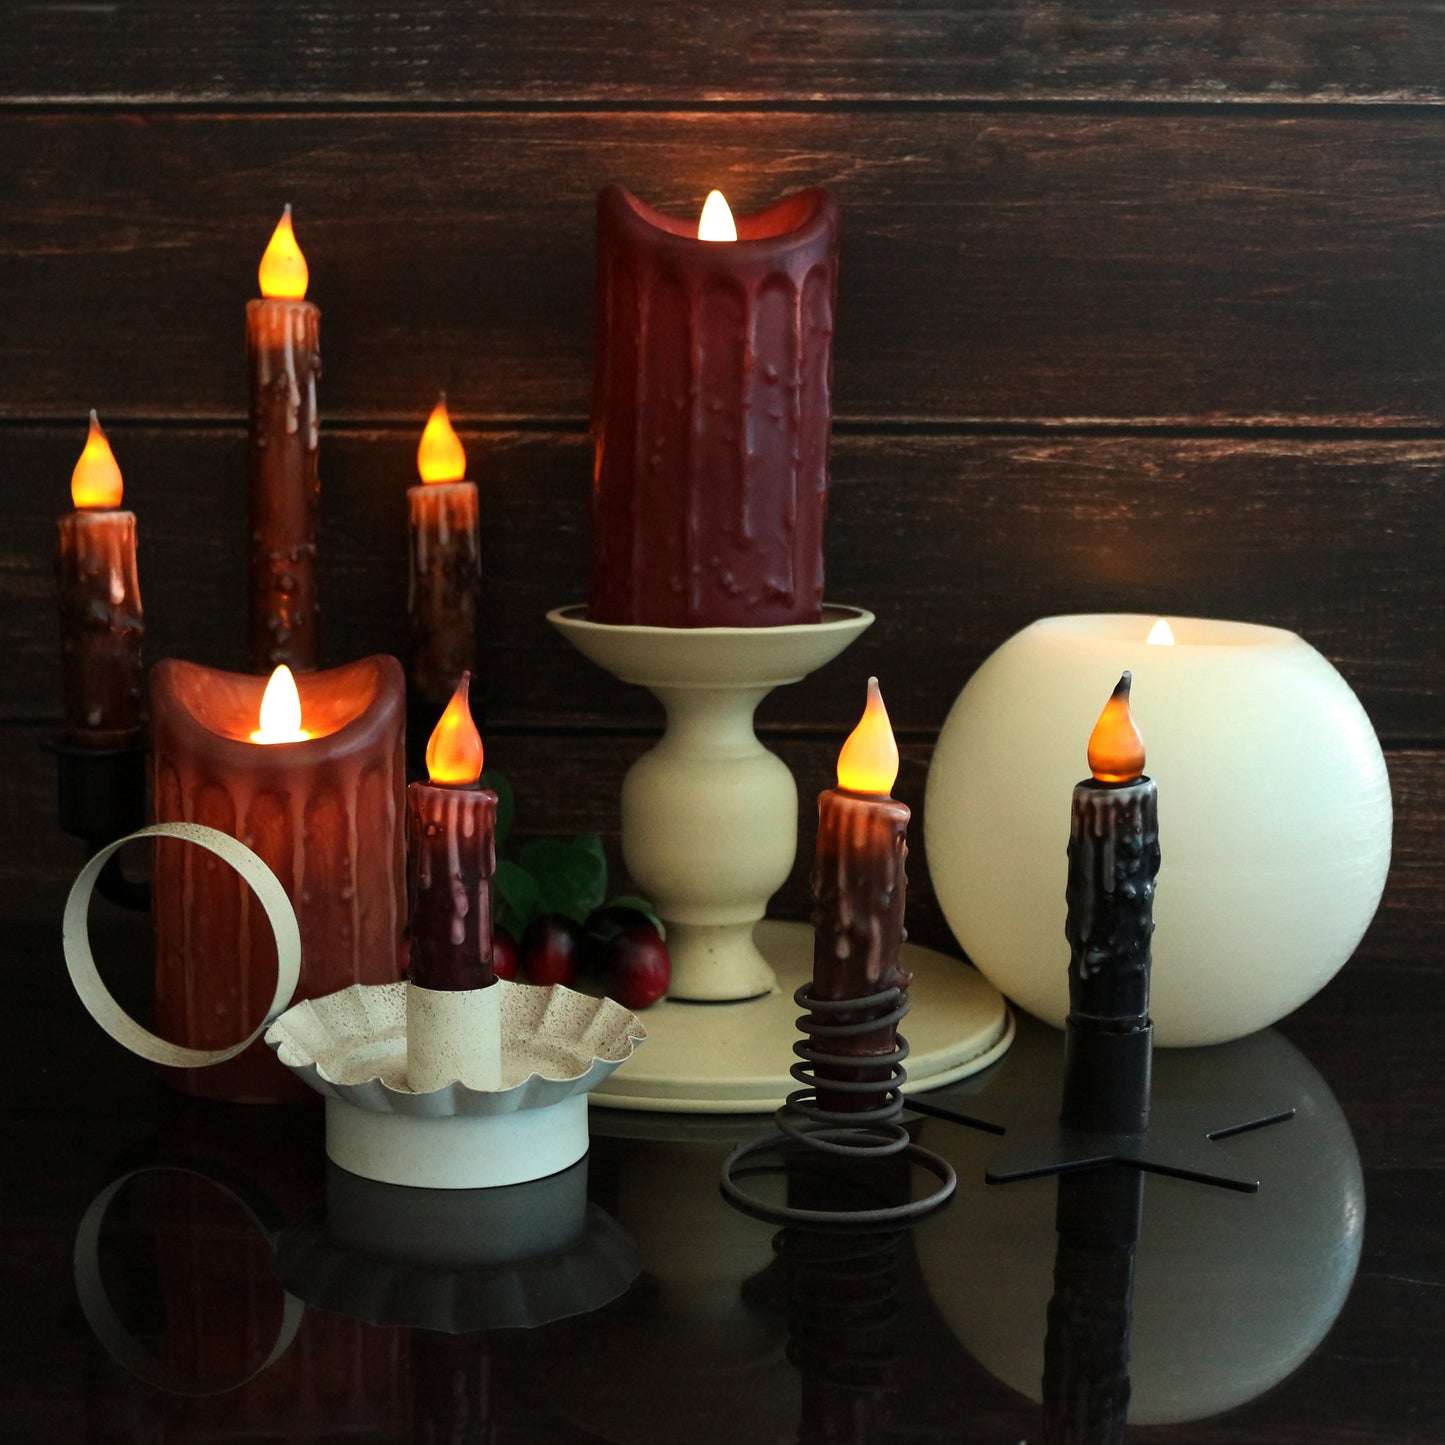 CVHOMEDECO. Real Wax Hand Dipped Battery Operated LED Timer Taper Candles Rustic Primitive Flameless Lights Décor, 4.75 Inch, Matt Black, 6 PCS in a Package